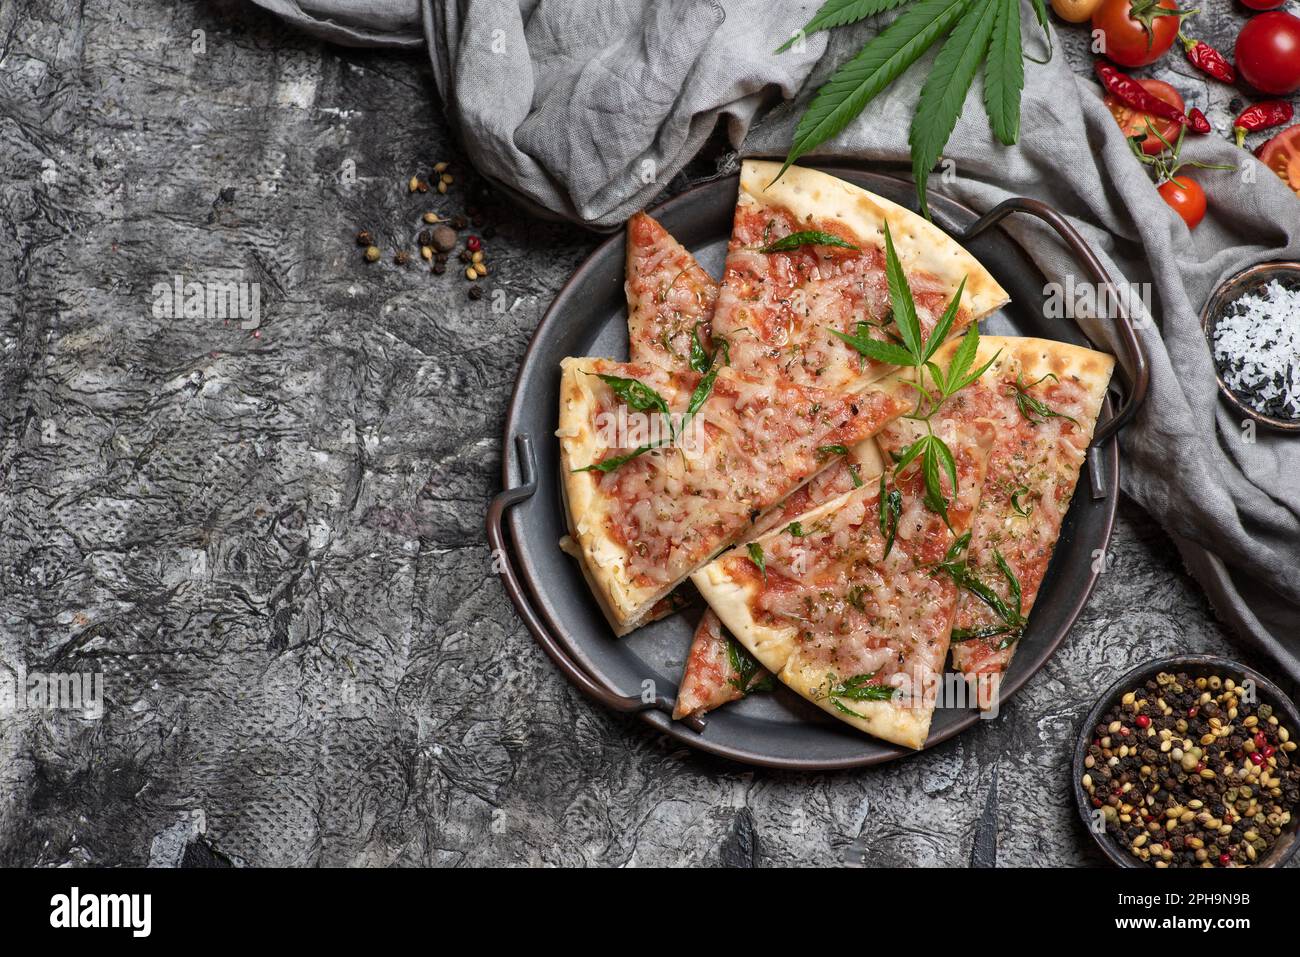 Pizza slices with marijuana leaves in a metal bowl on a dark wooden background Stock Photo